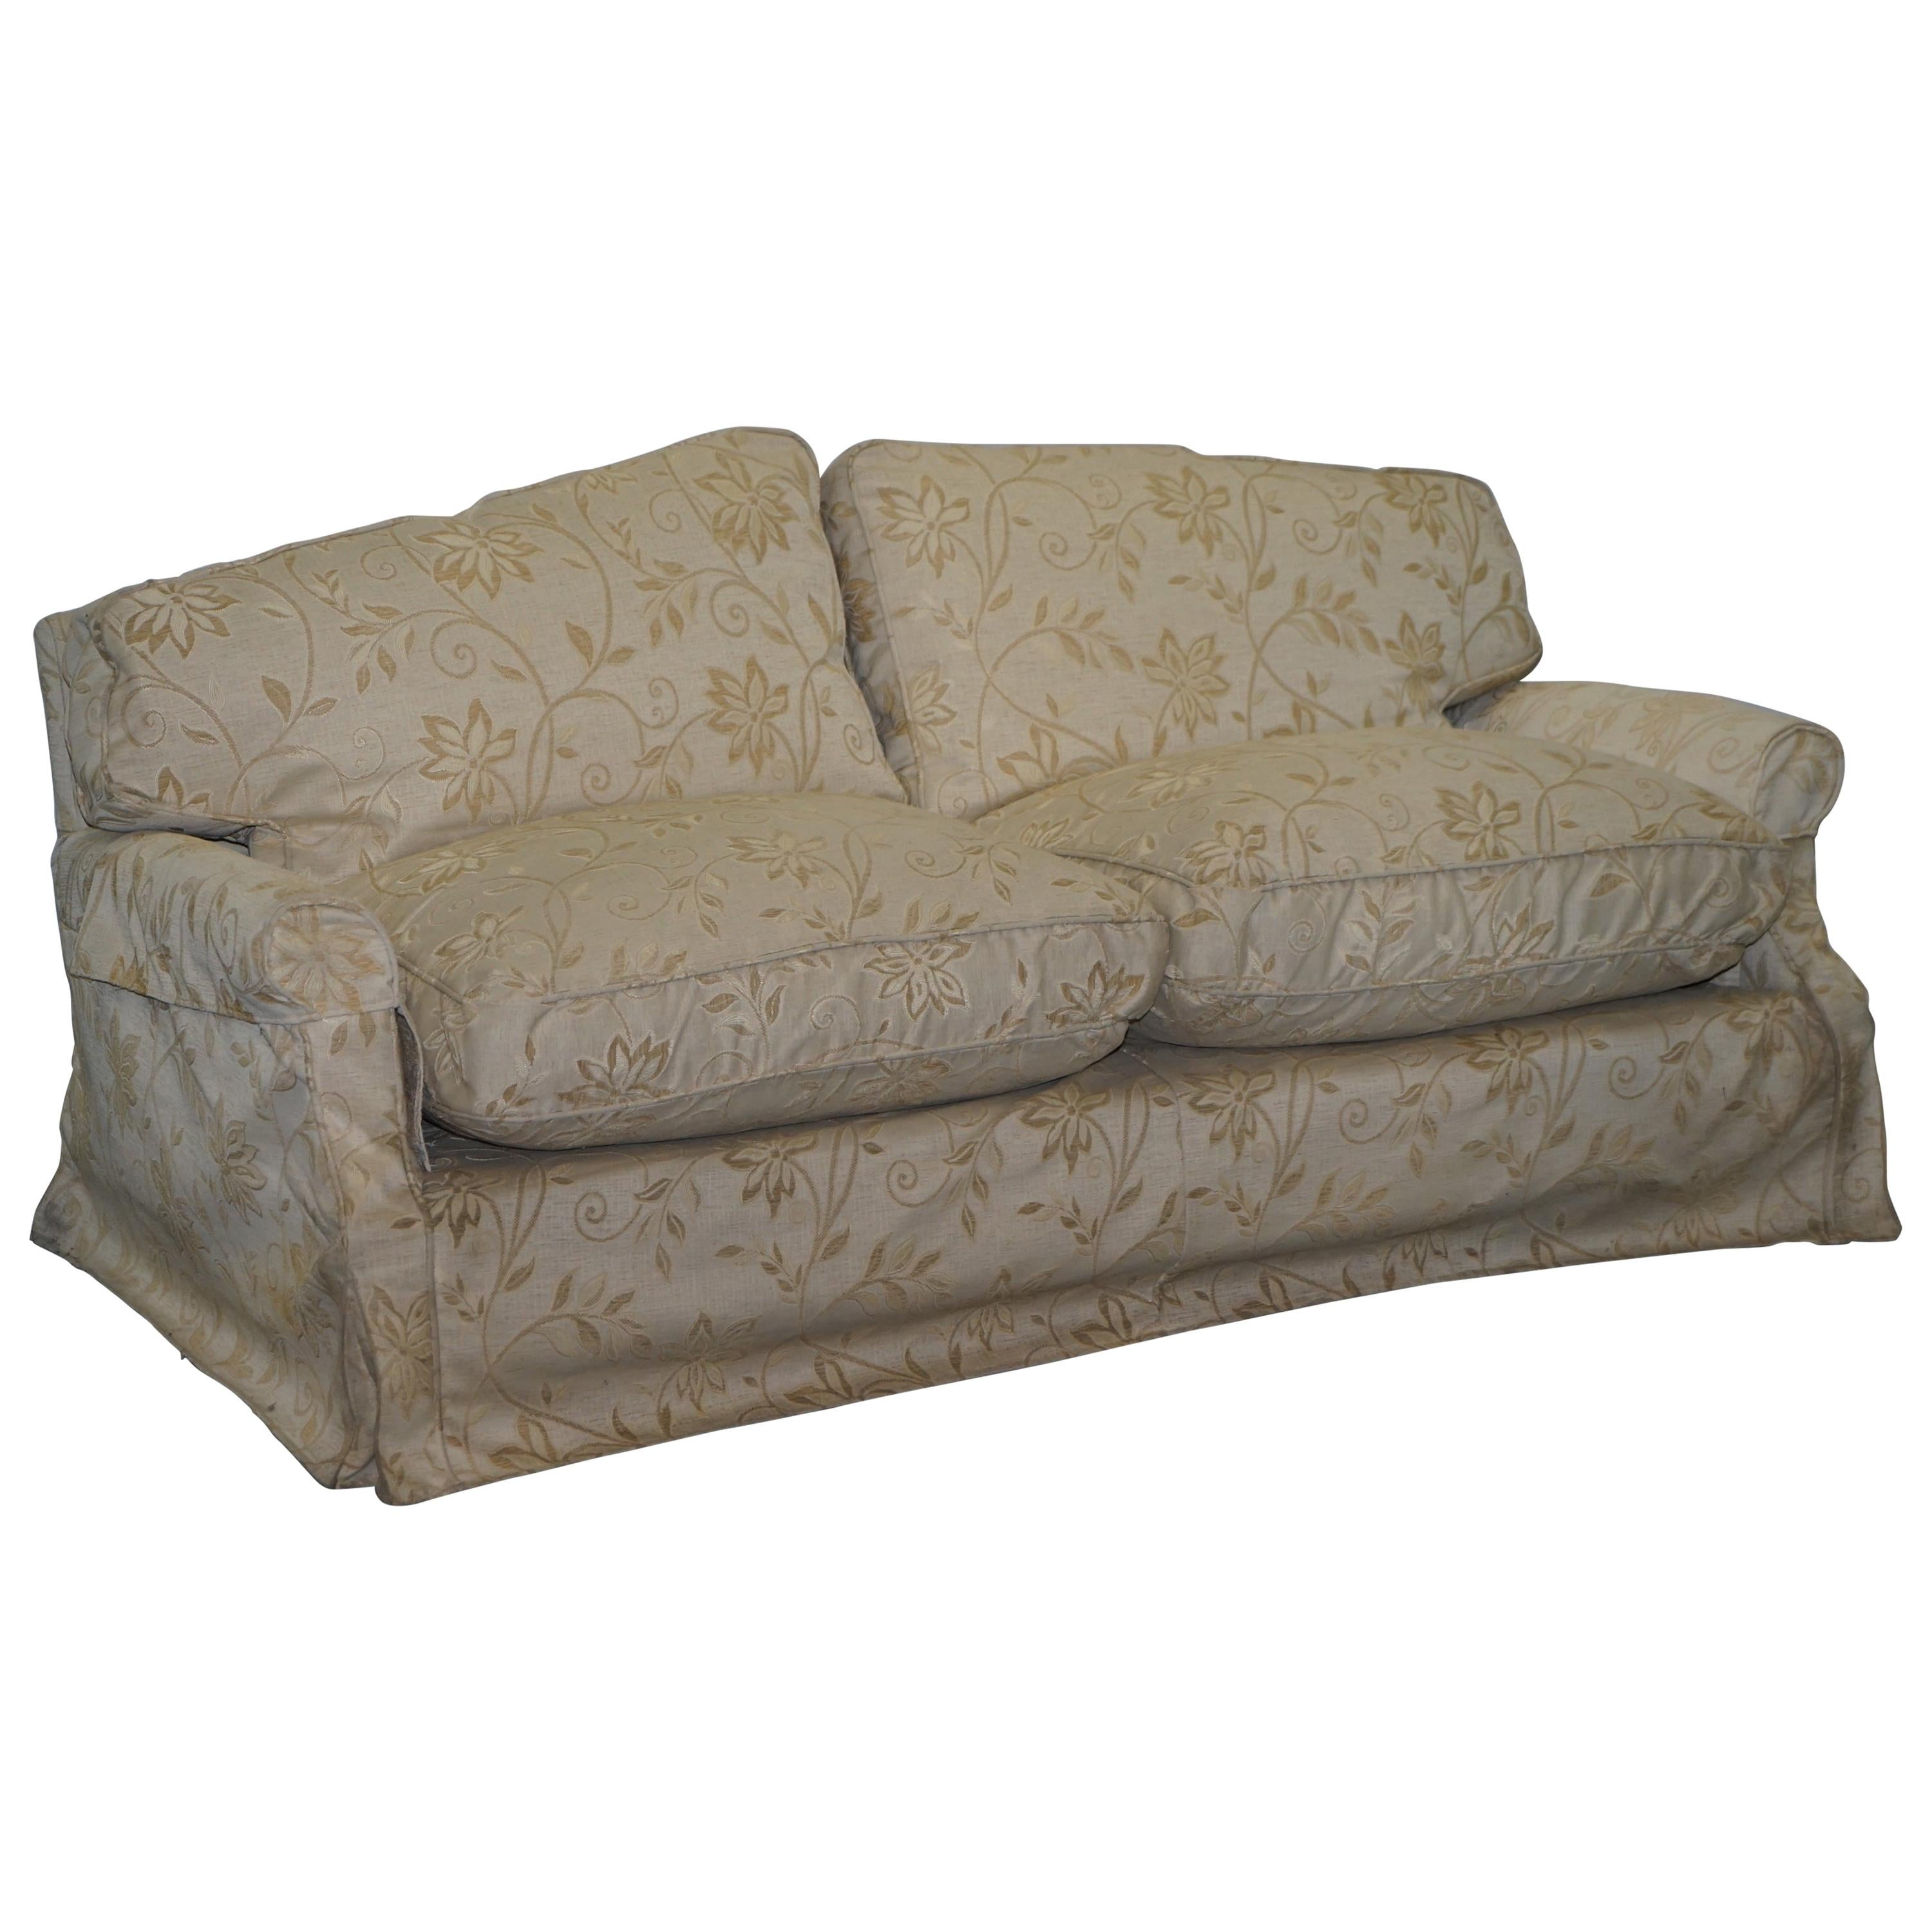 Victorian Howard & Sons Sofa with Feather Filled Cushions and Removable Covers